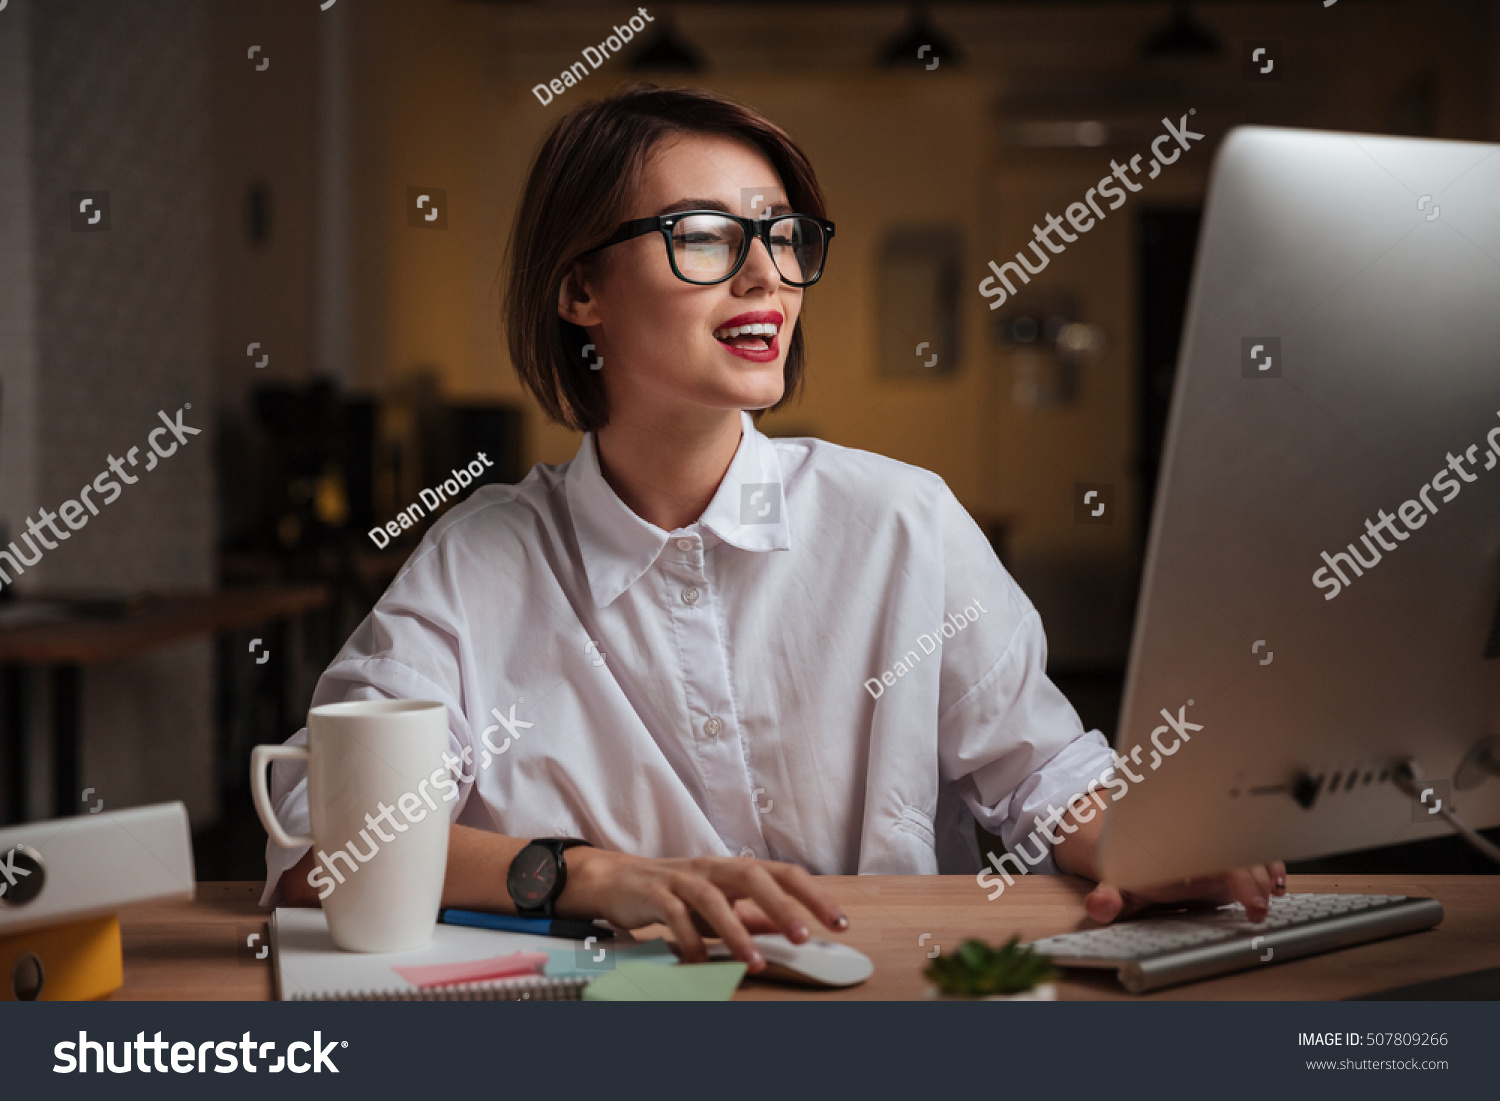 Cheerful young businesswoman in glasses using computer and smiling in office #507809266